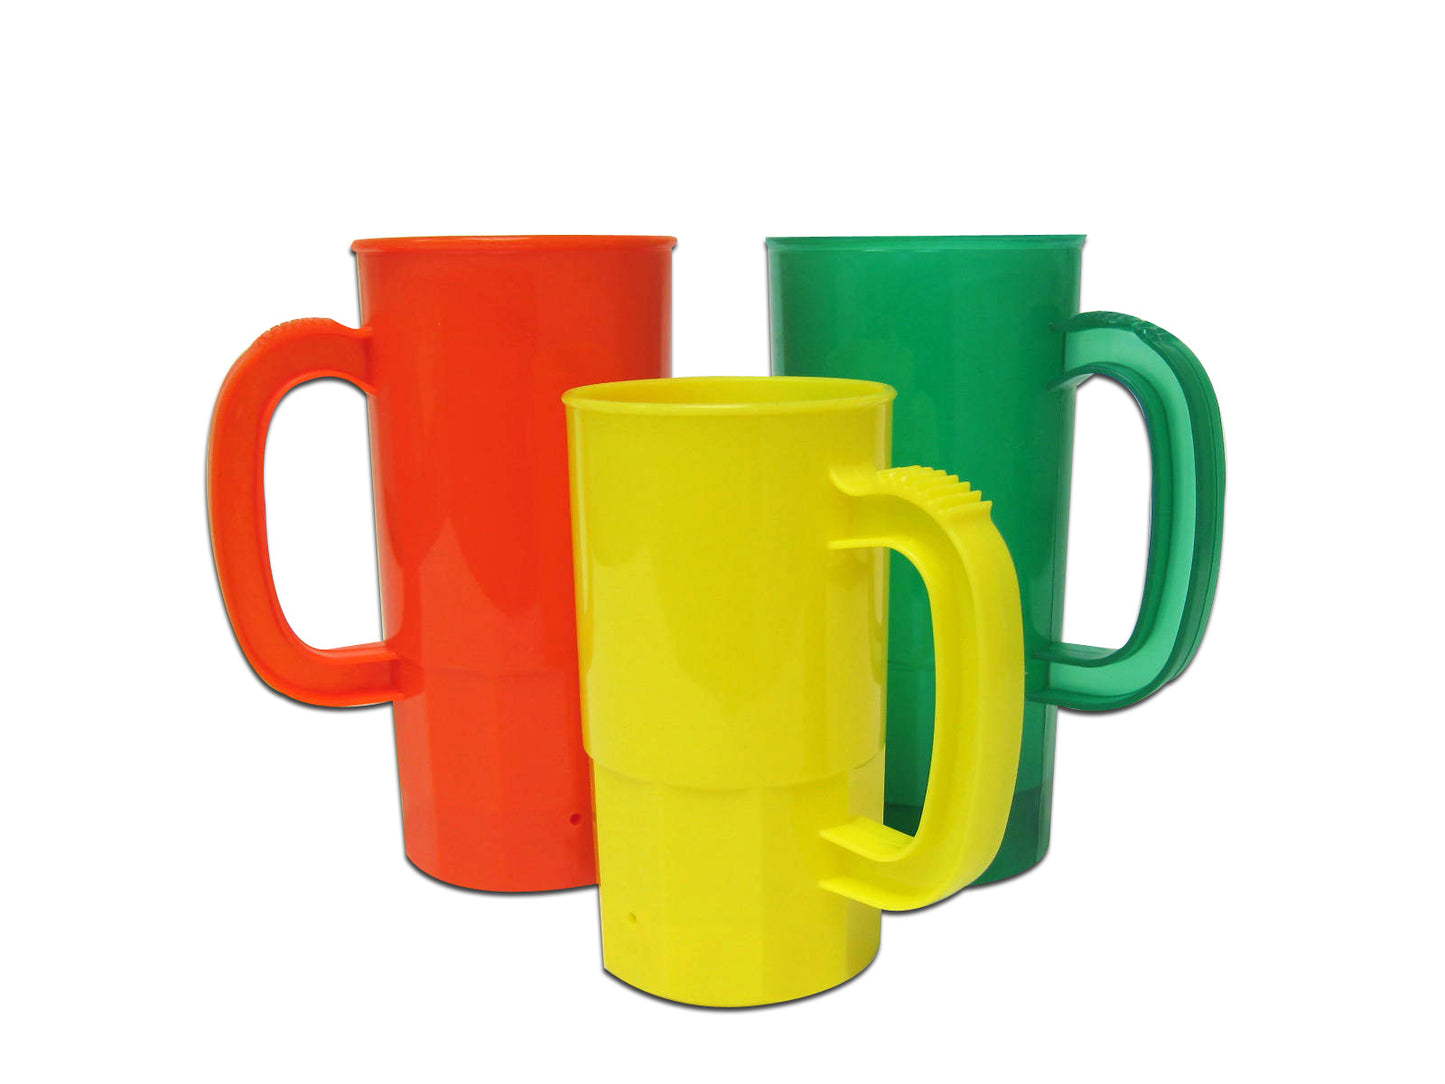 birthday party beer steins